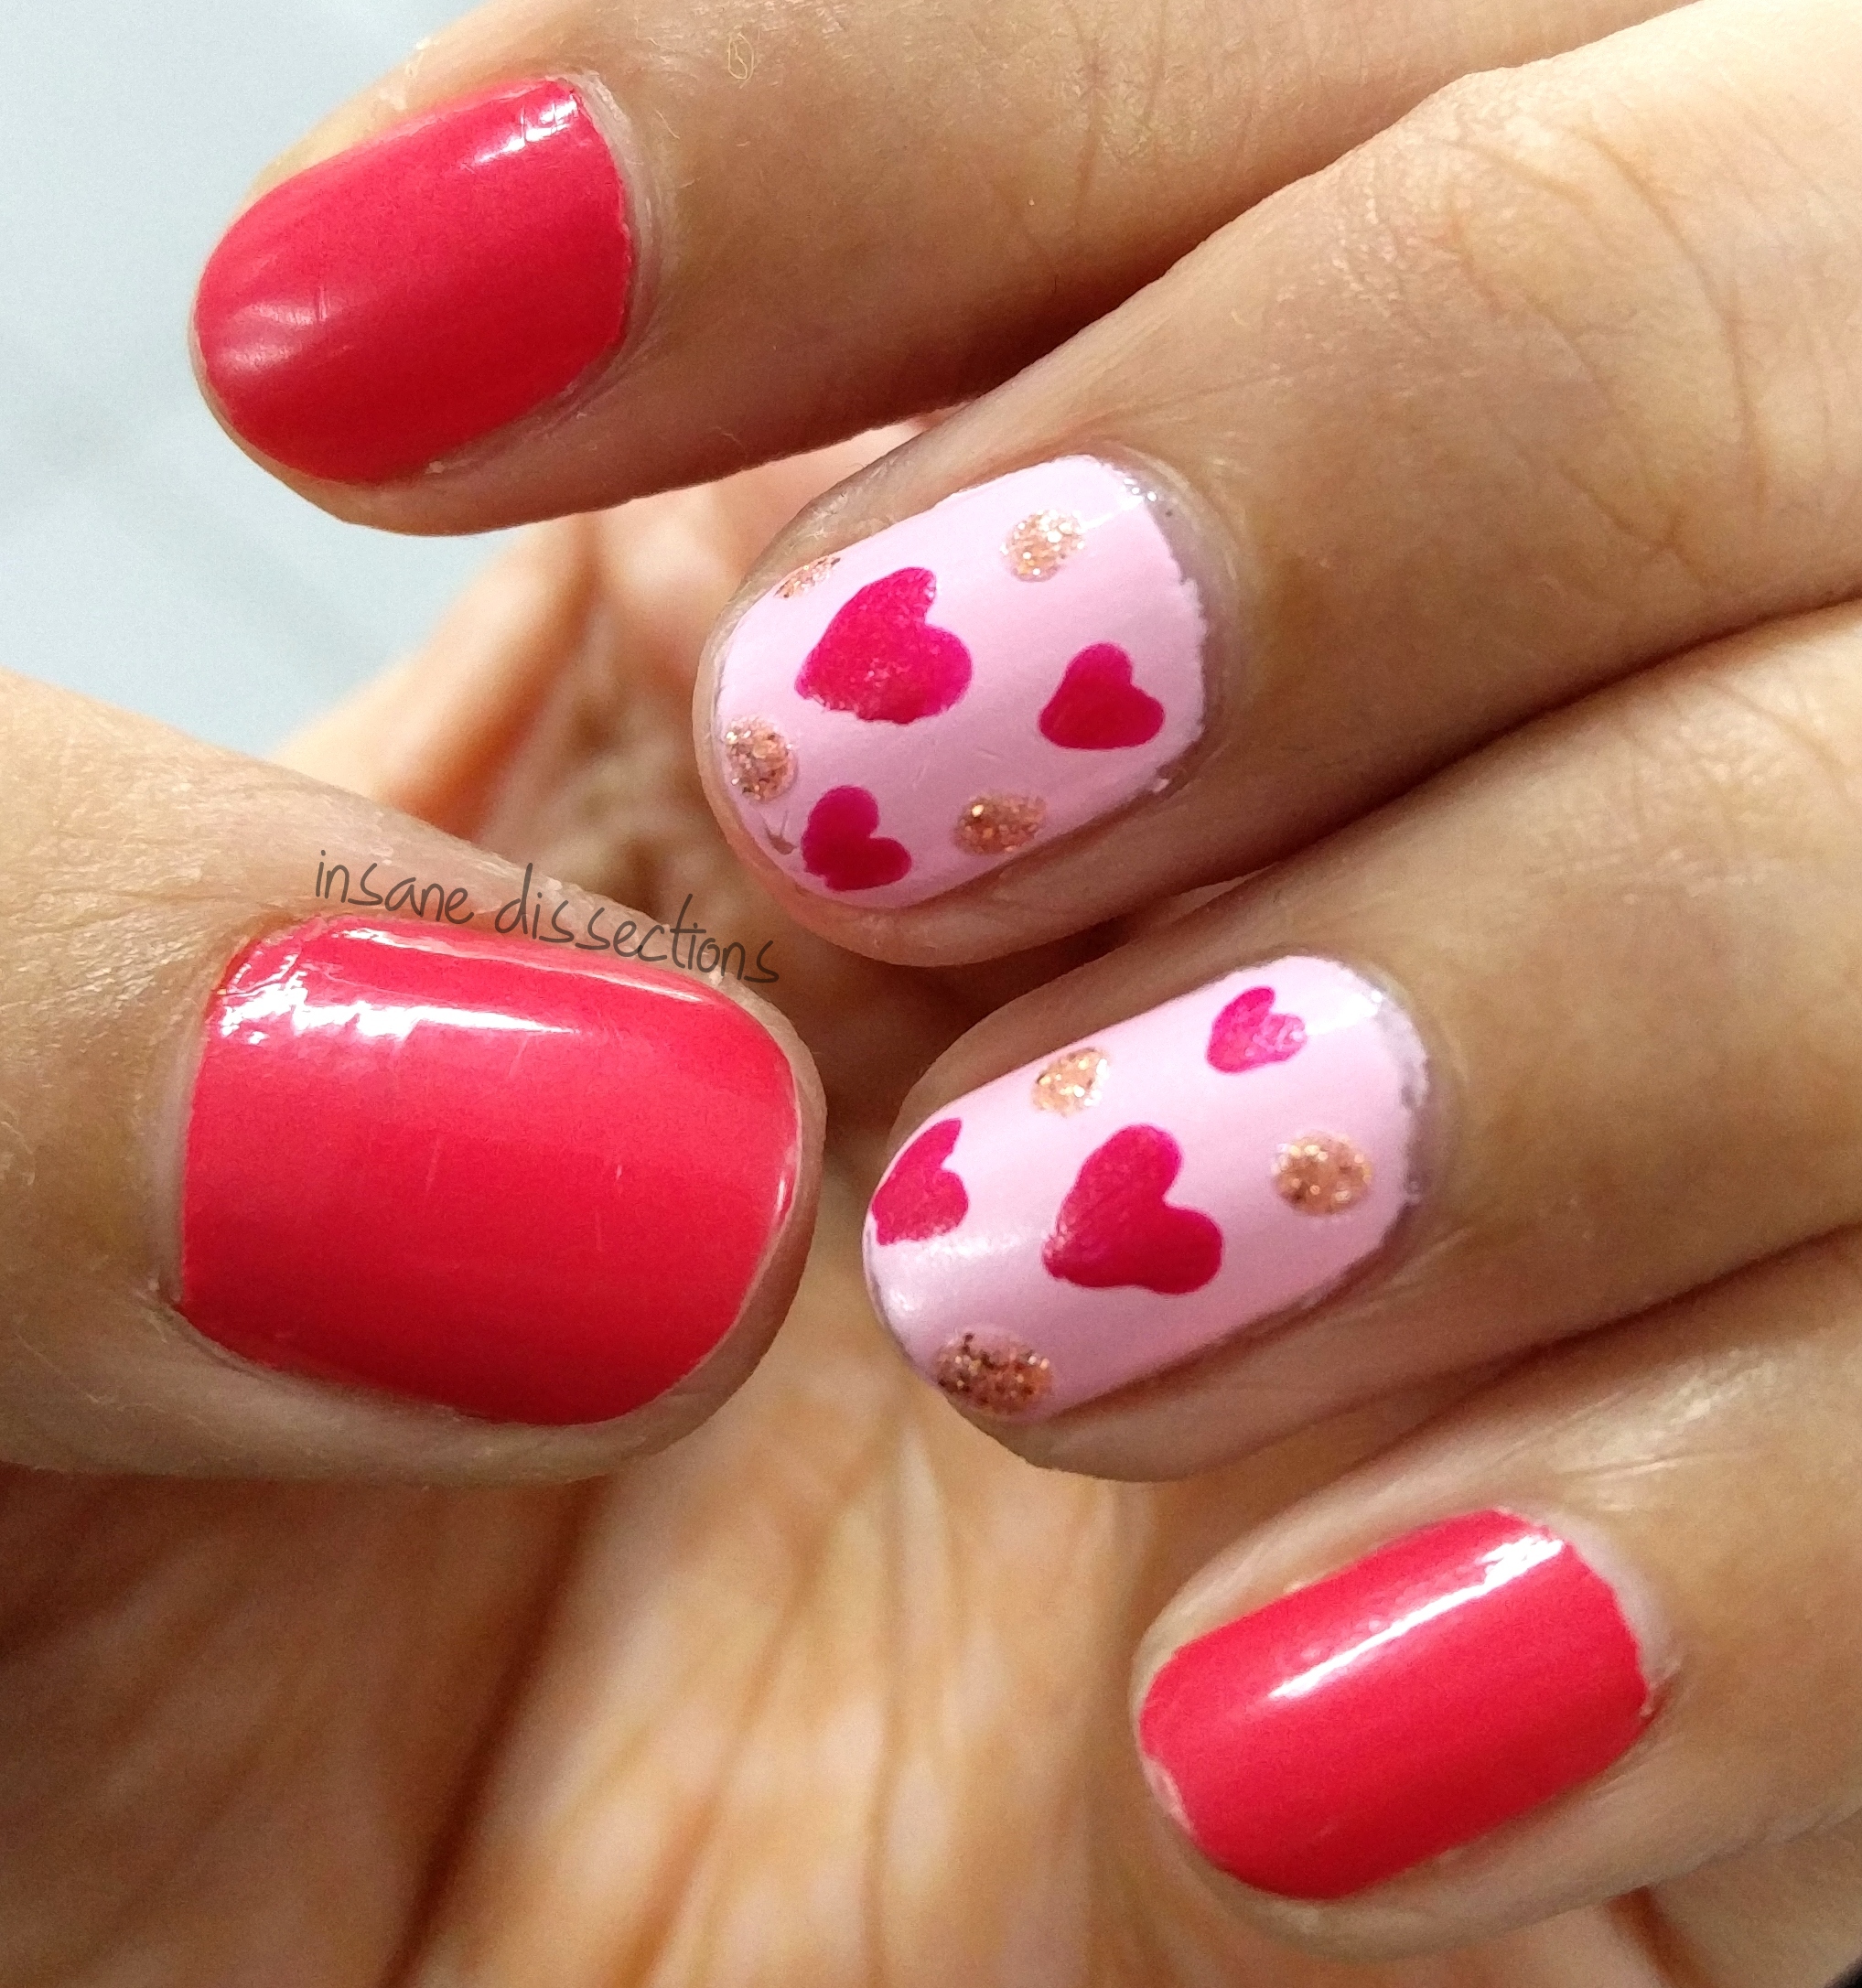 Heart Nail Art Ideas for Valentine's Day | Makeup.com